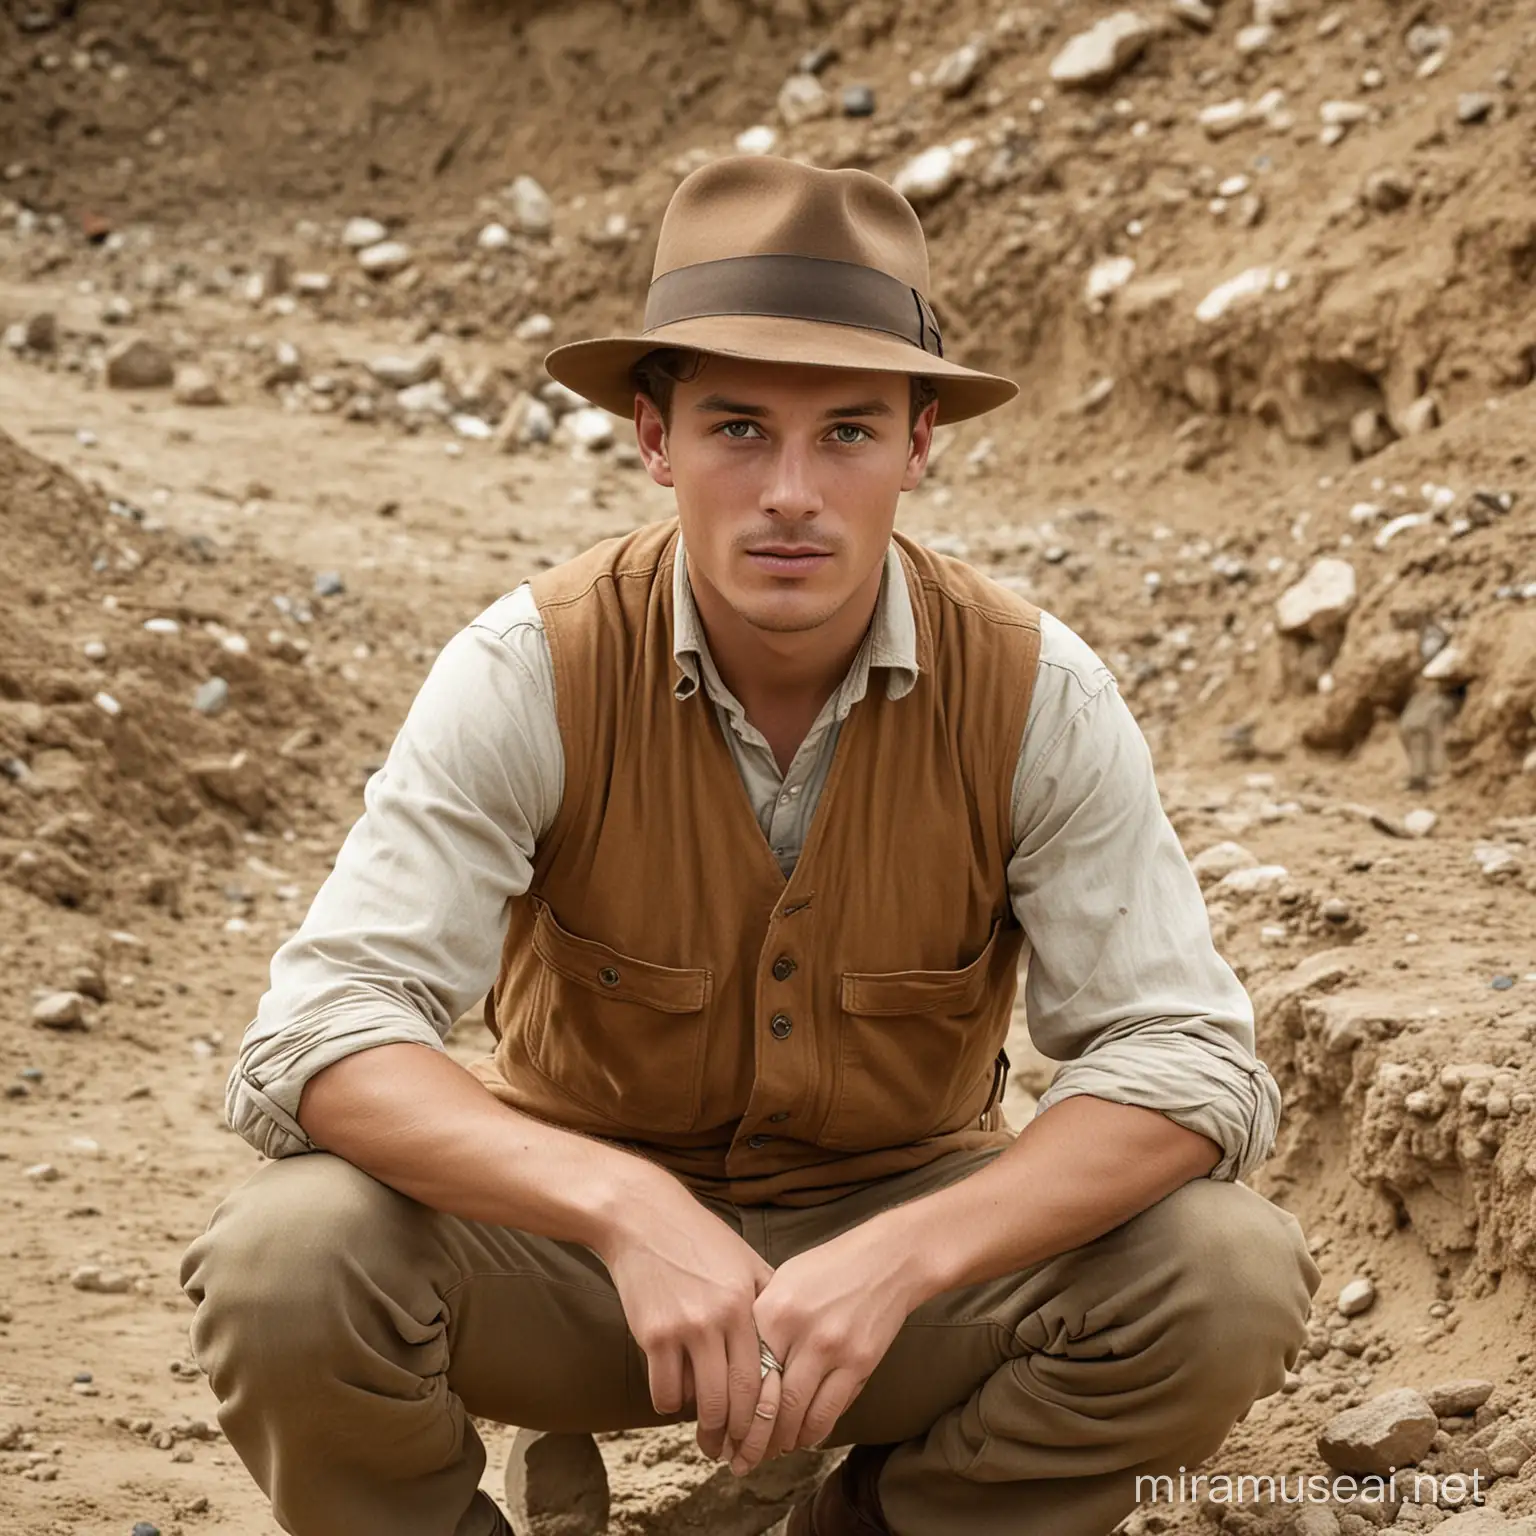 Archaeologist, young man, 1920s, europe, brown hair, fedora hat, excavation site, colored, brwon vest